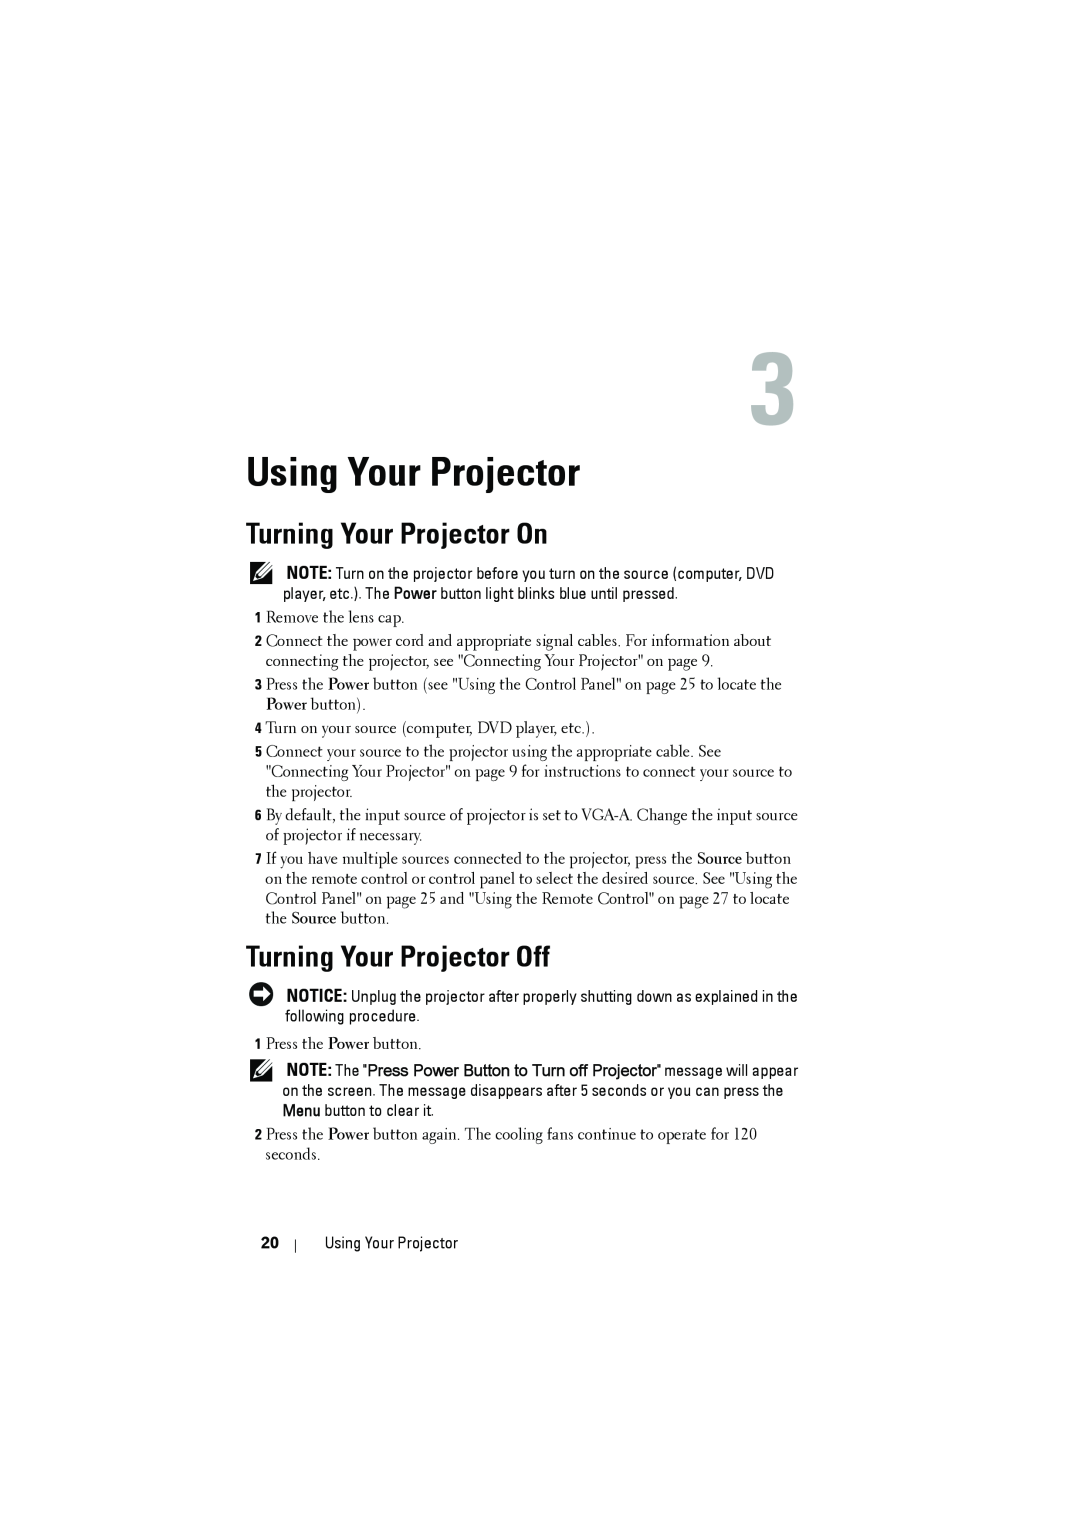 Dell S300 manual Using Your Projector, Turning Your Projector On, Turning Your Projector Off 